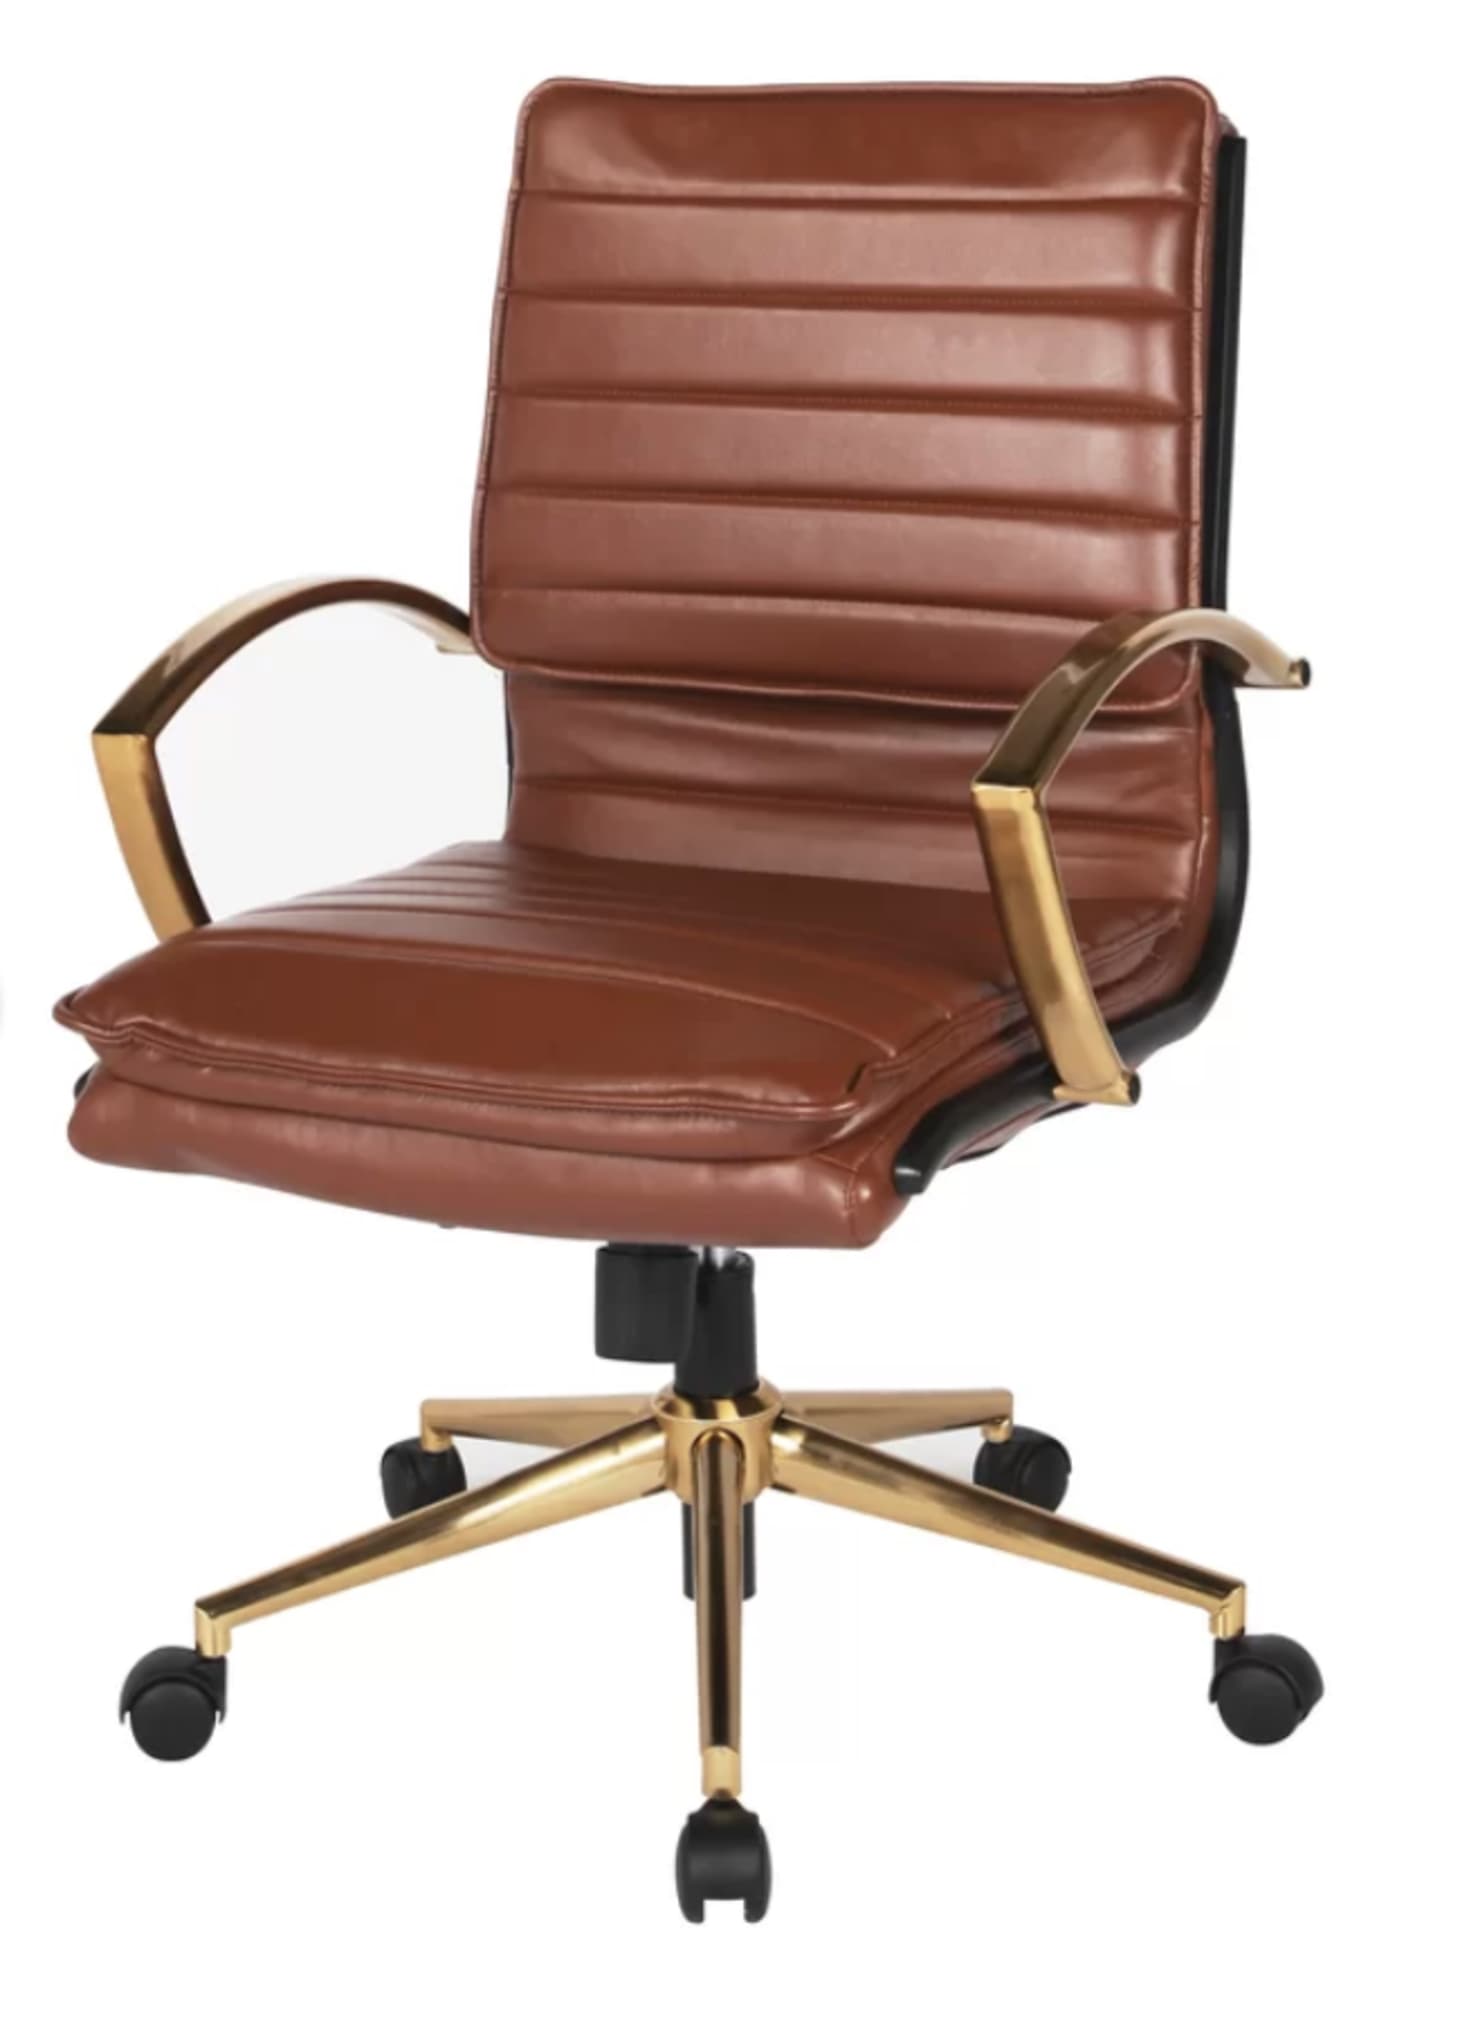 Best Office Chair / Top Rated Modern Leather Office Chair : One of the